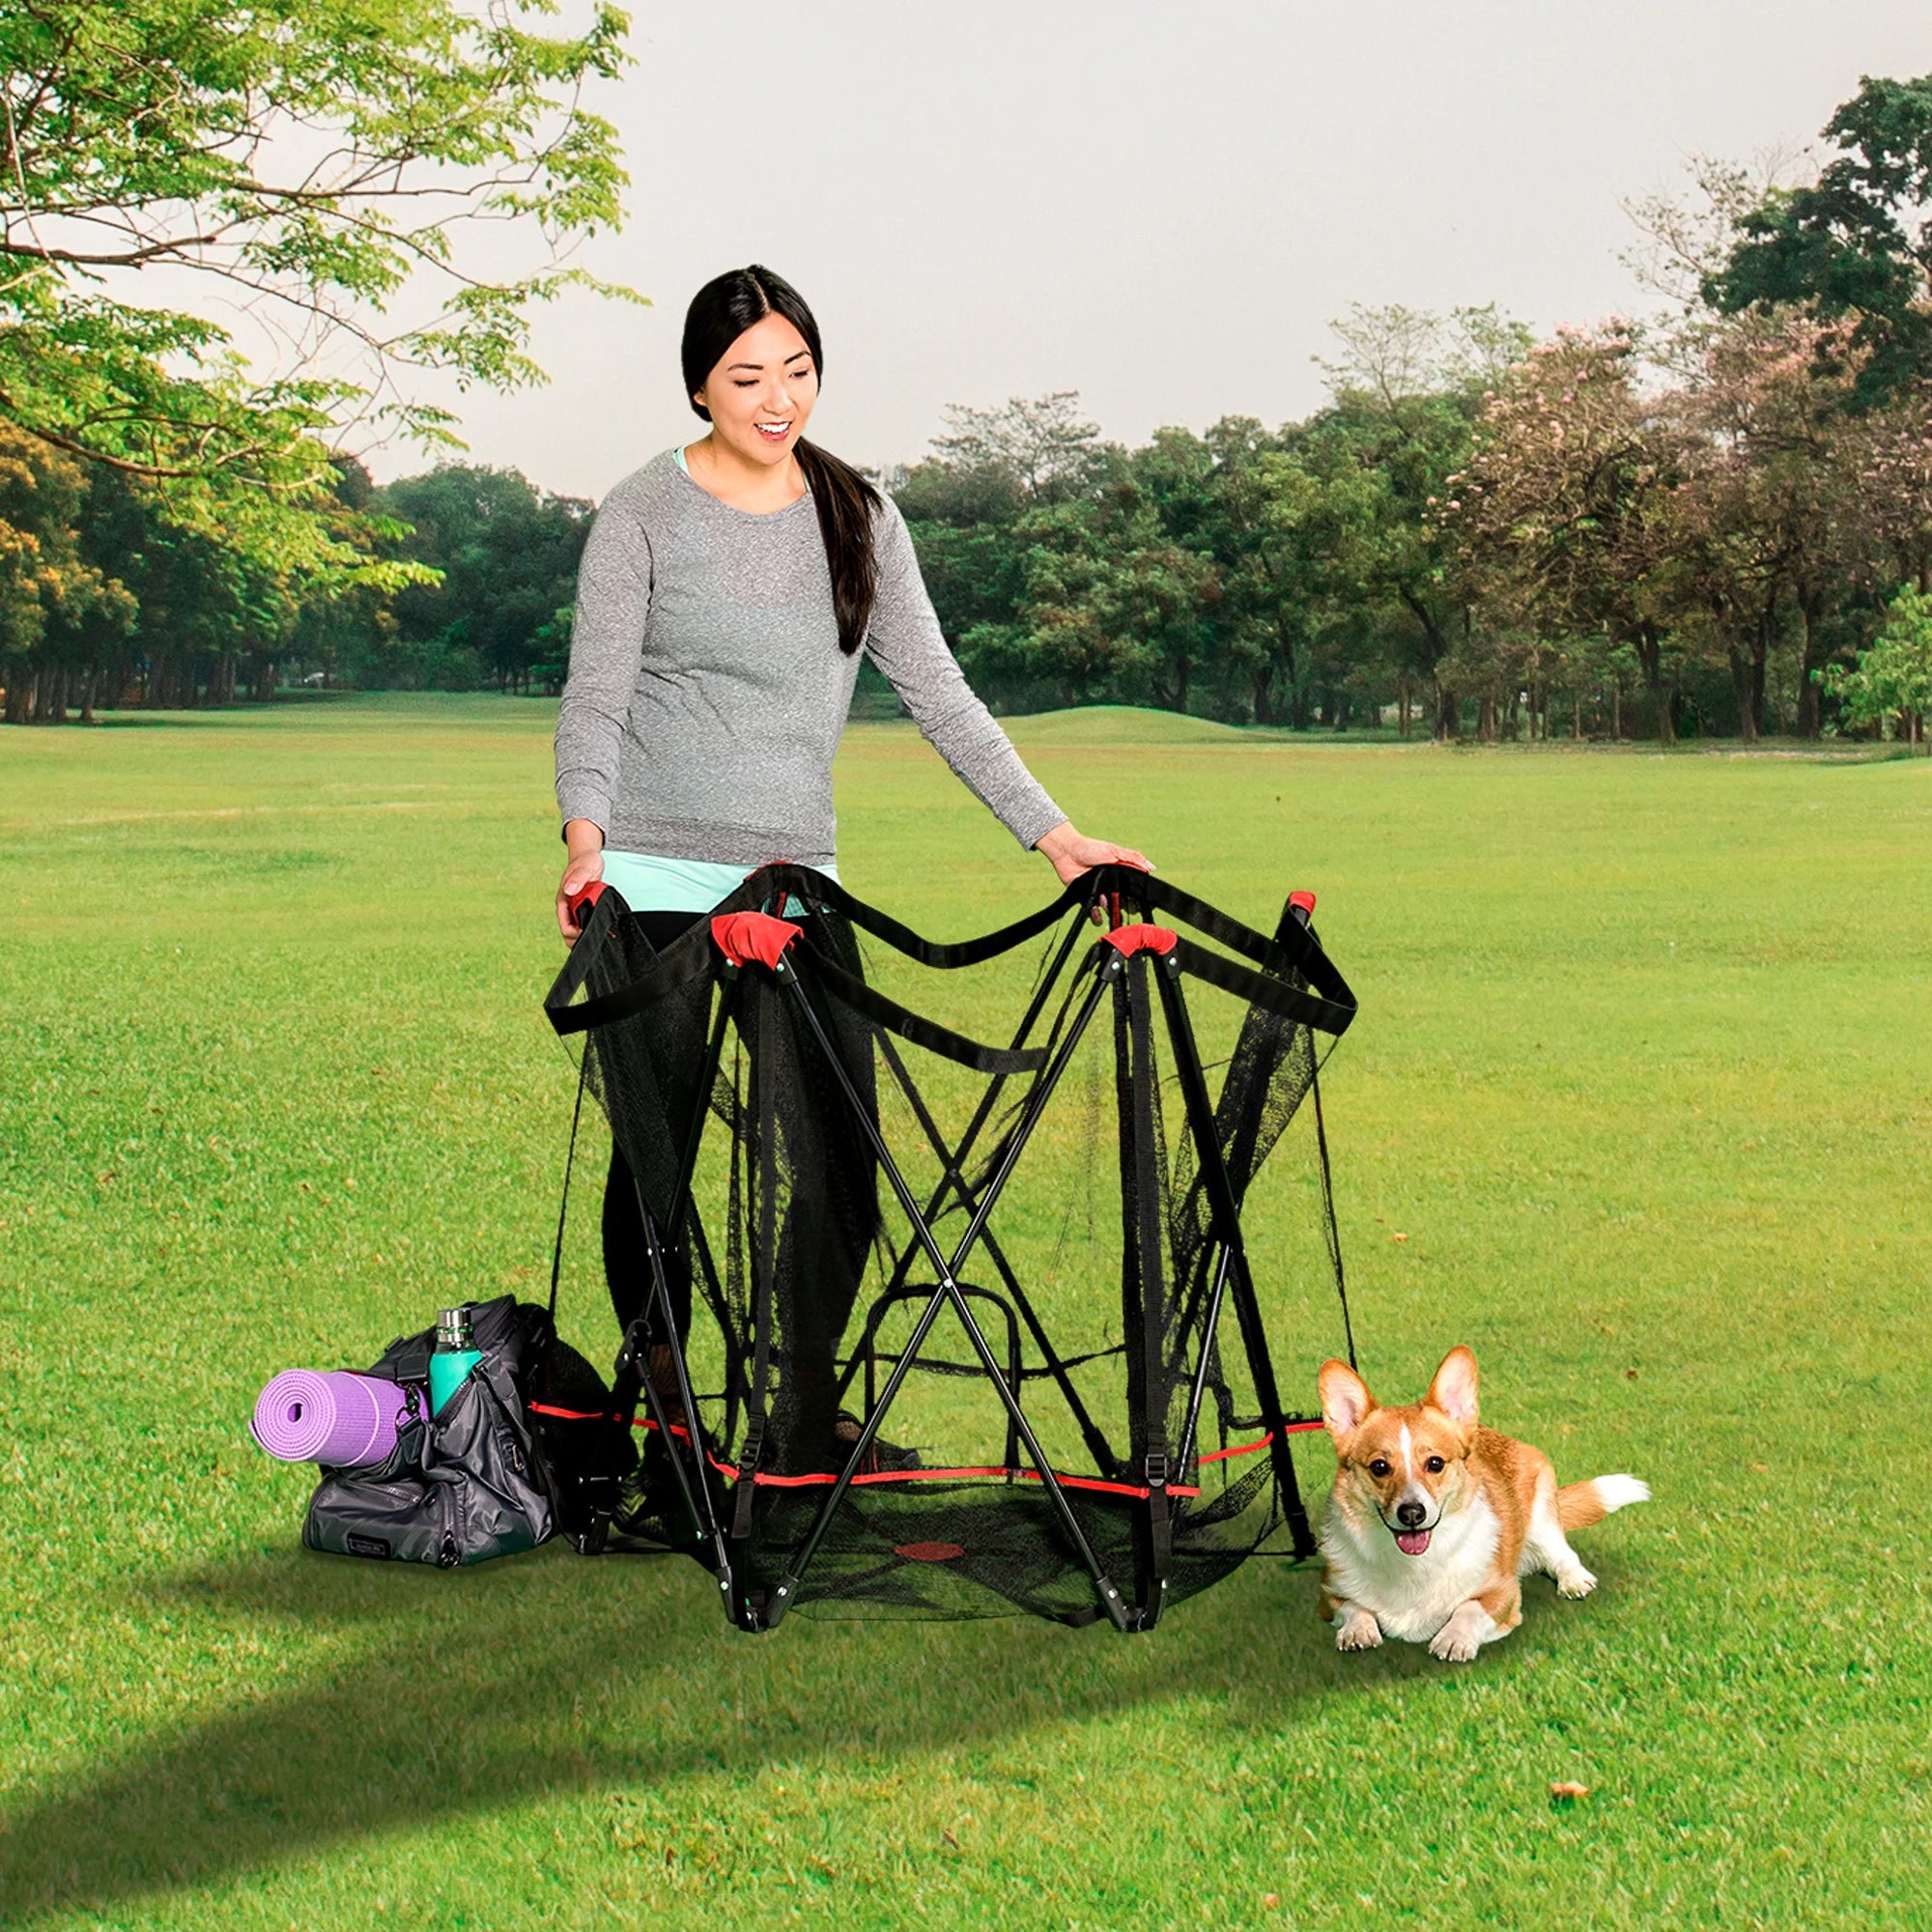 Woman at park setting up Portable Pet Pen while dog sits on the ground.